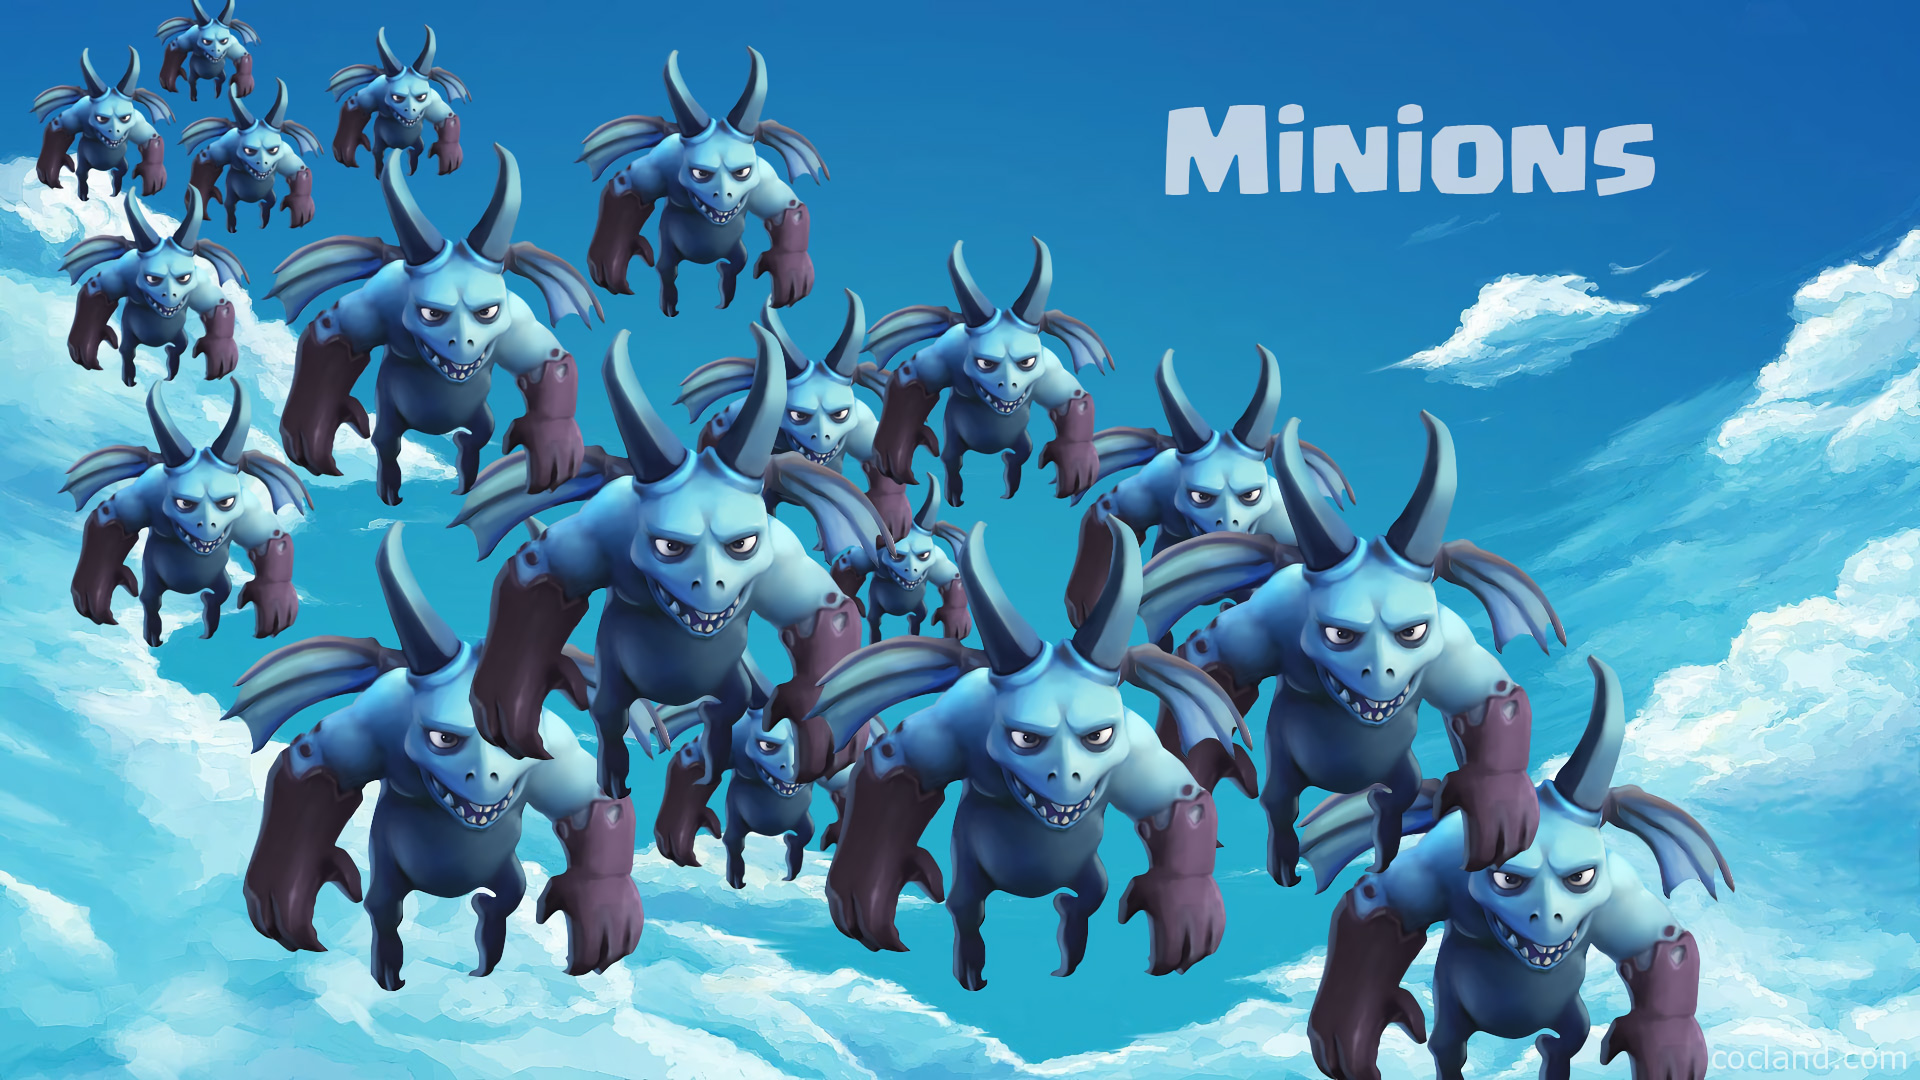 Wallpaper Minions of clash of clans mobile game